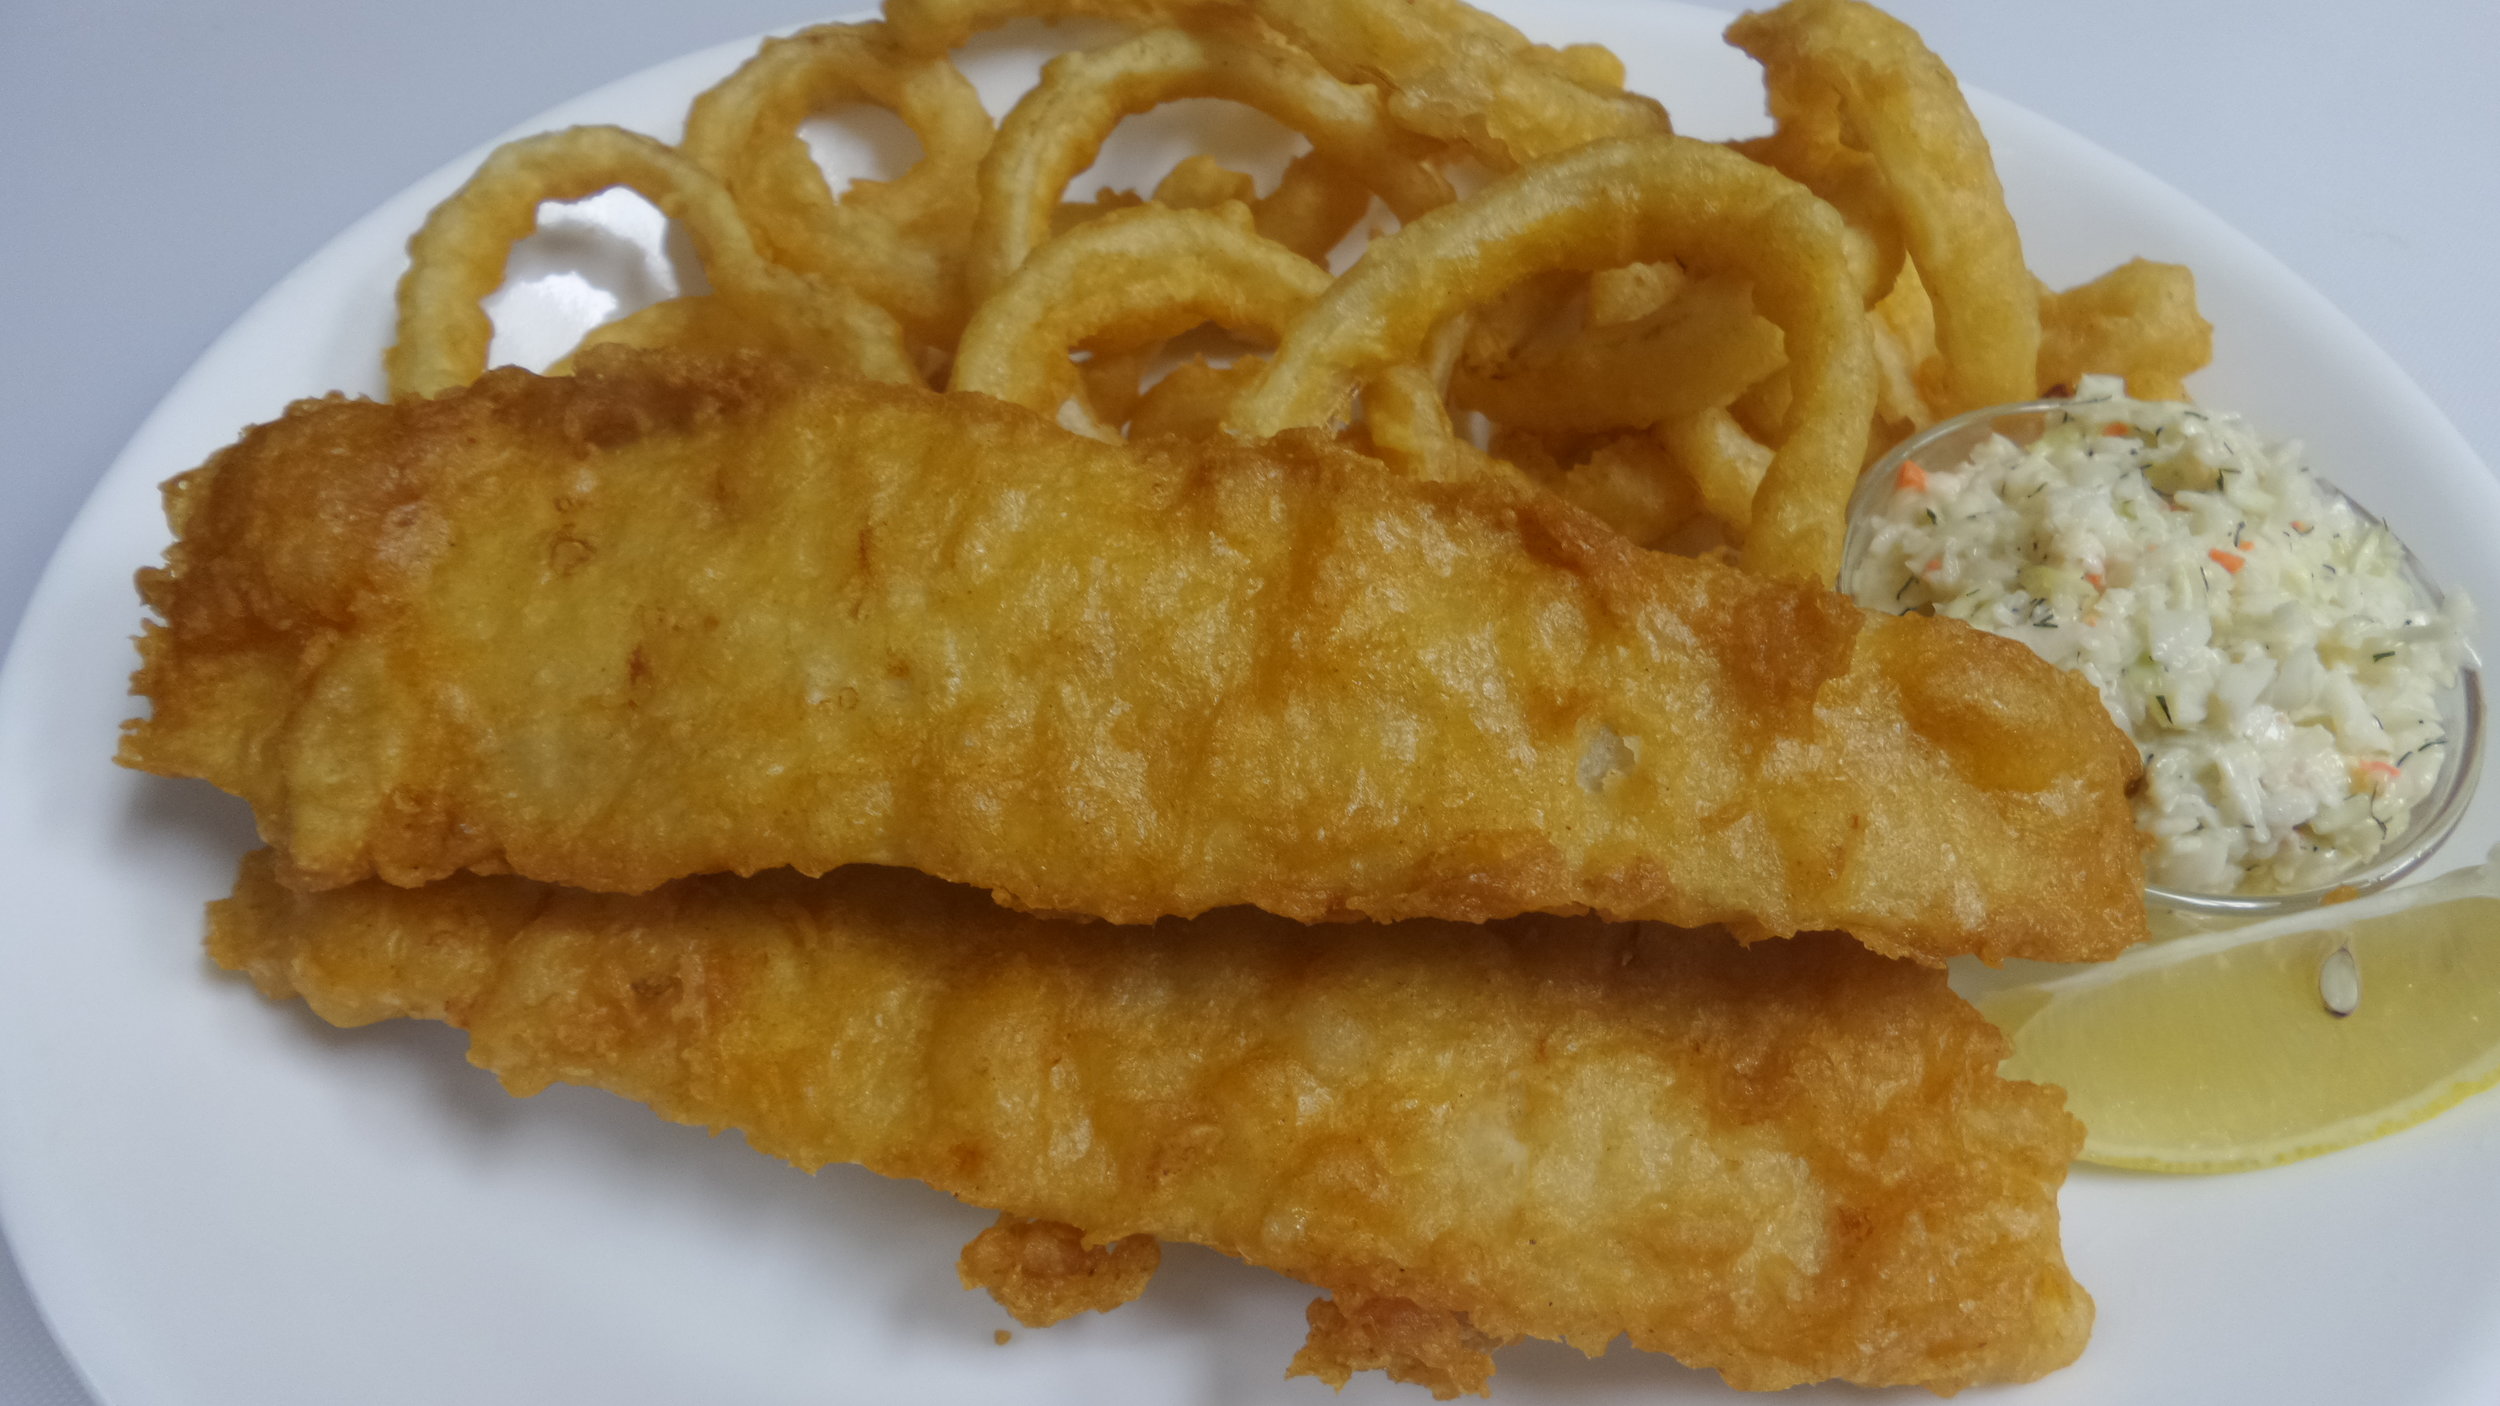 2 Pcs Fish (Pollock) with Onion Rings